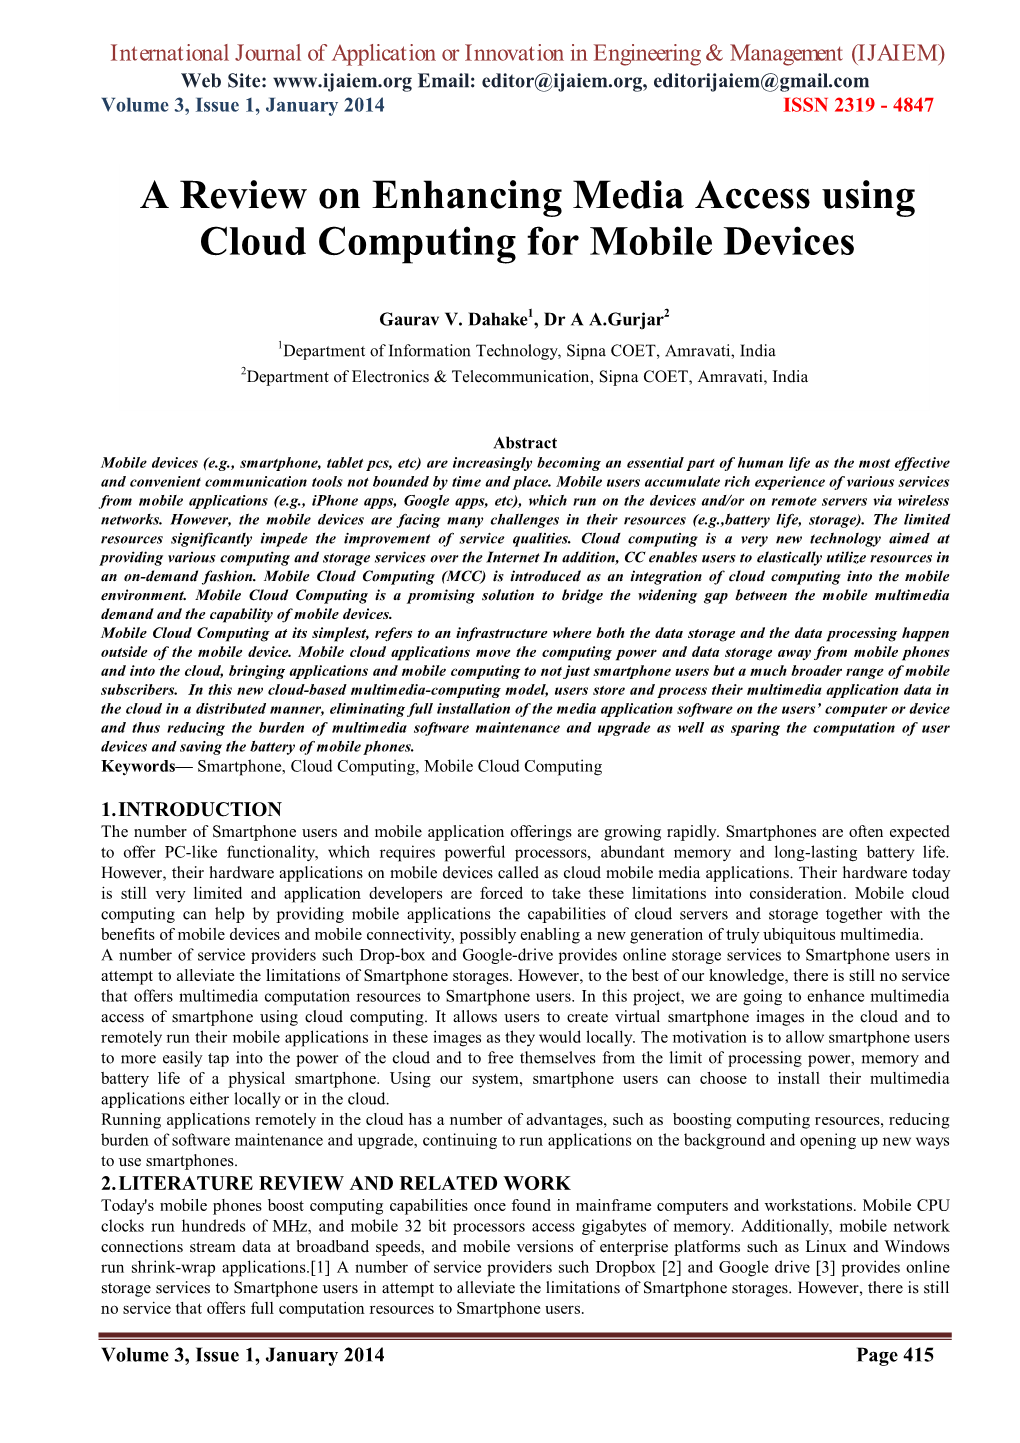 A Review on Enhancing Media Access Using Cloud Computing for Mobile Devices